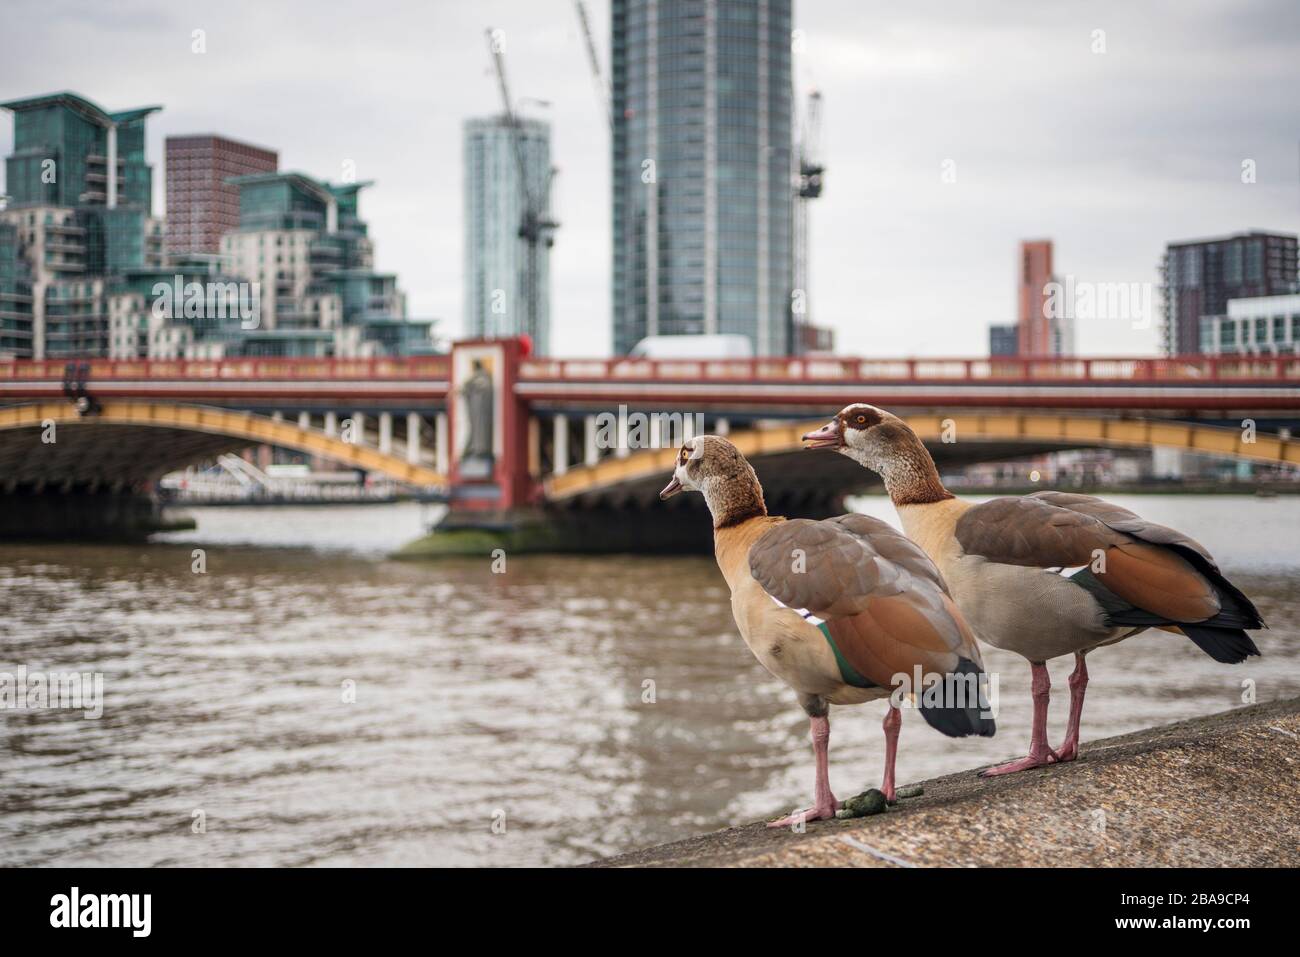 Two Egyptian geese by River Thames, London, UK.  These geese were  introduced as an ornamental wildfowl species and have  escaped into the wild. Stock Photo